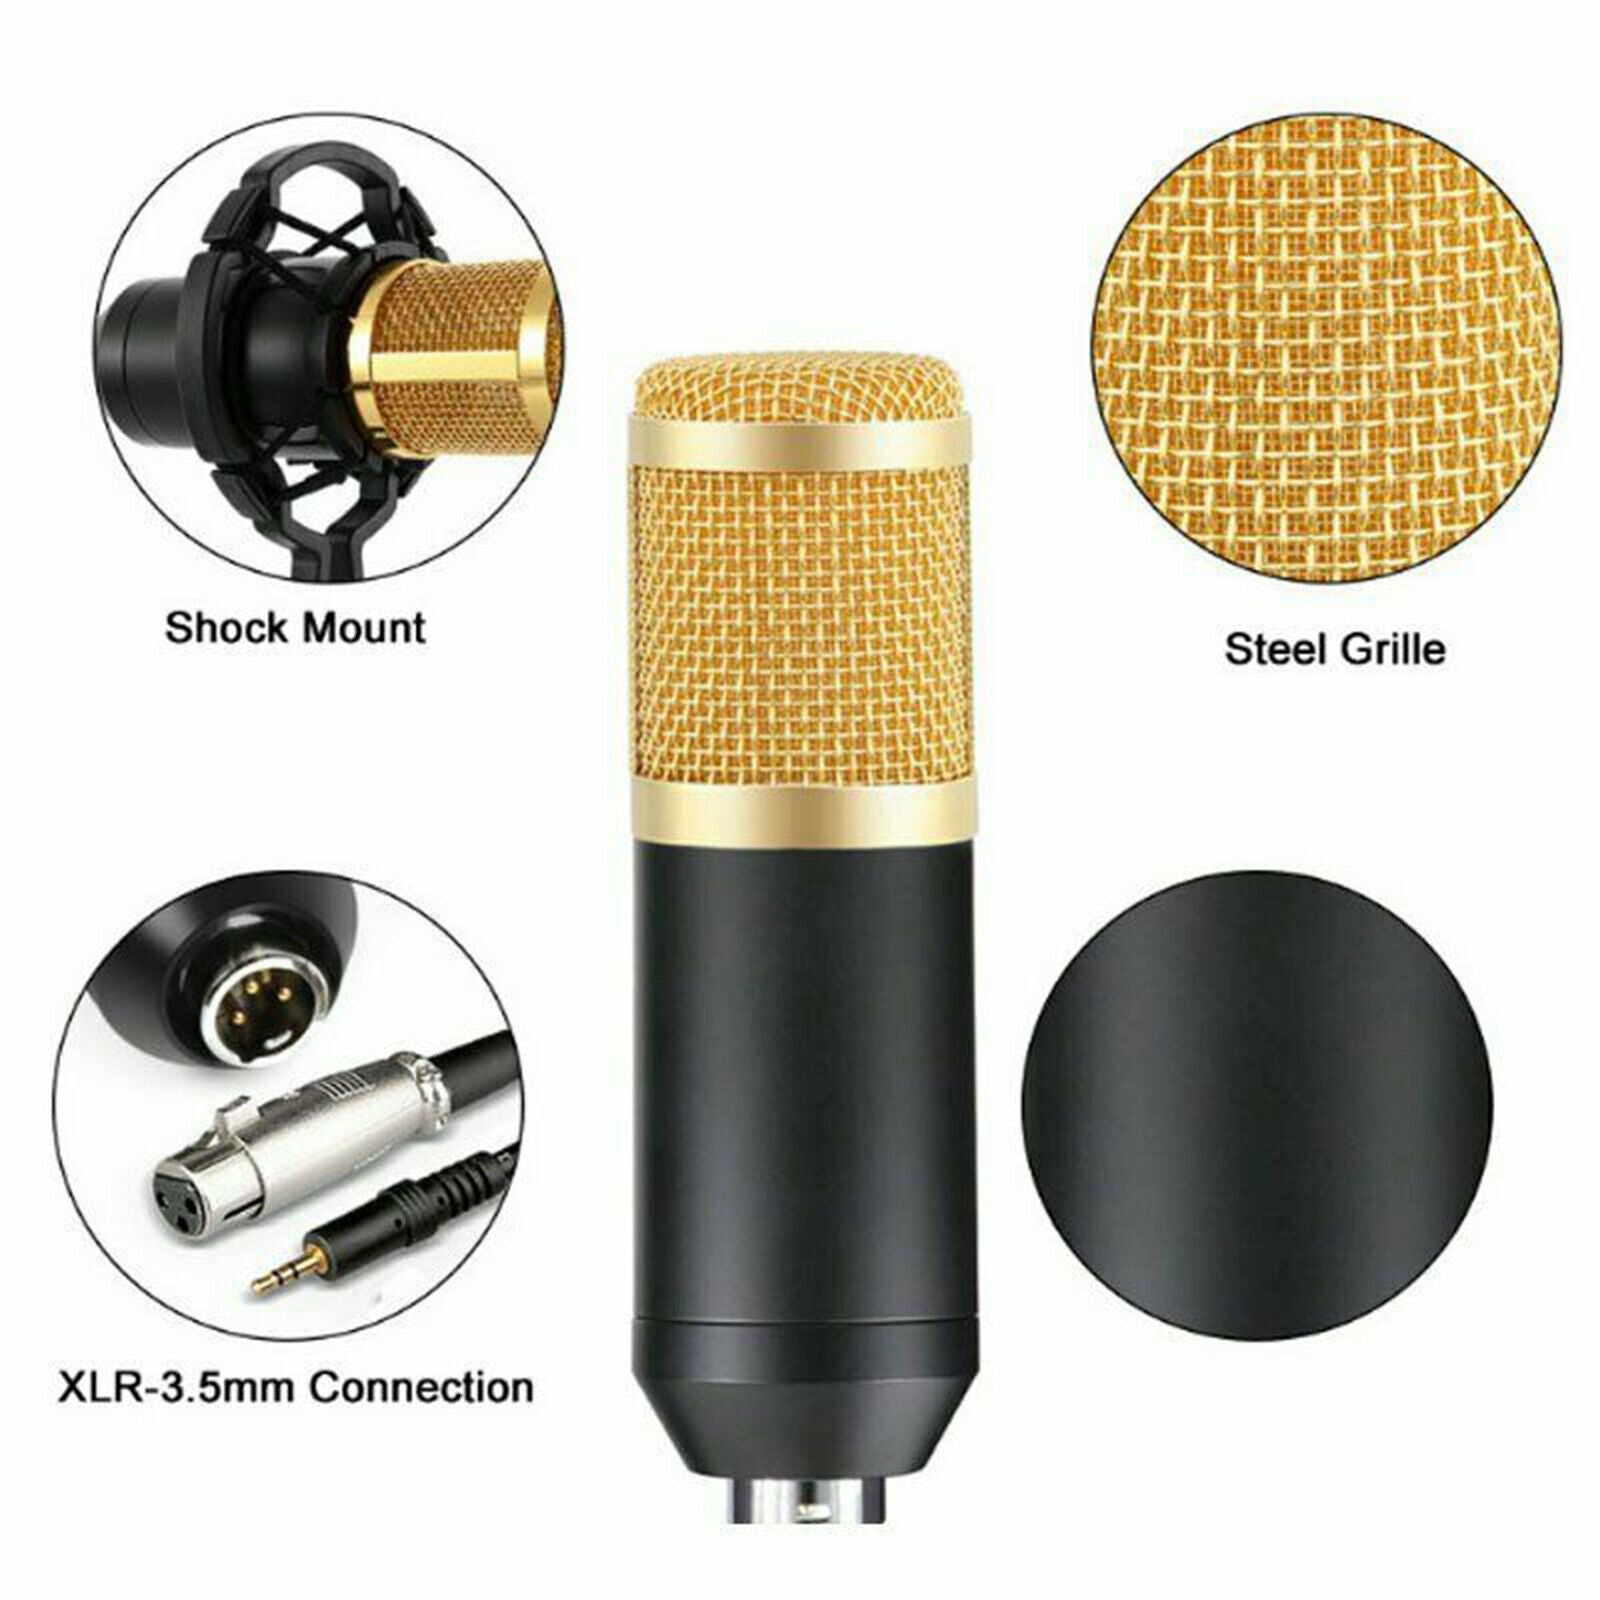 Professional Condenser Microphone Kit Cardioid Mic USB Cable for Podcasting